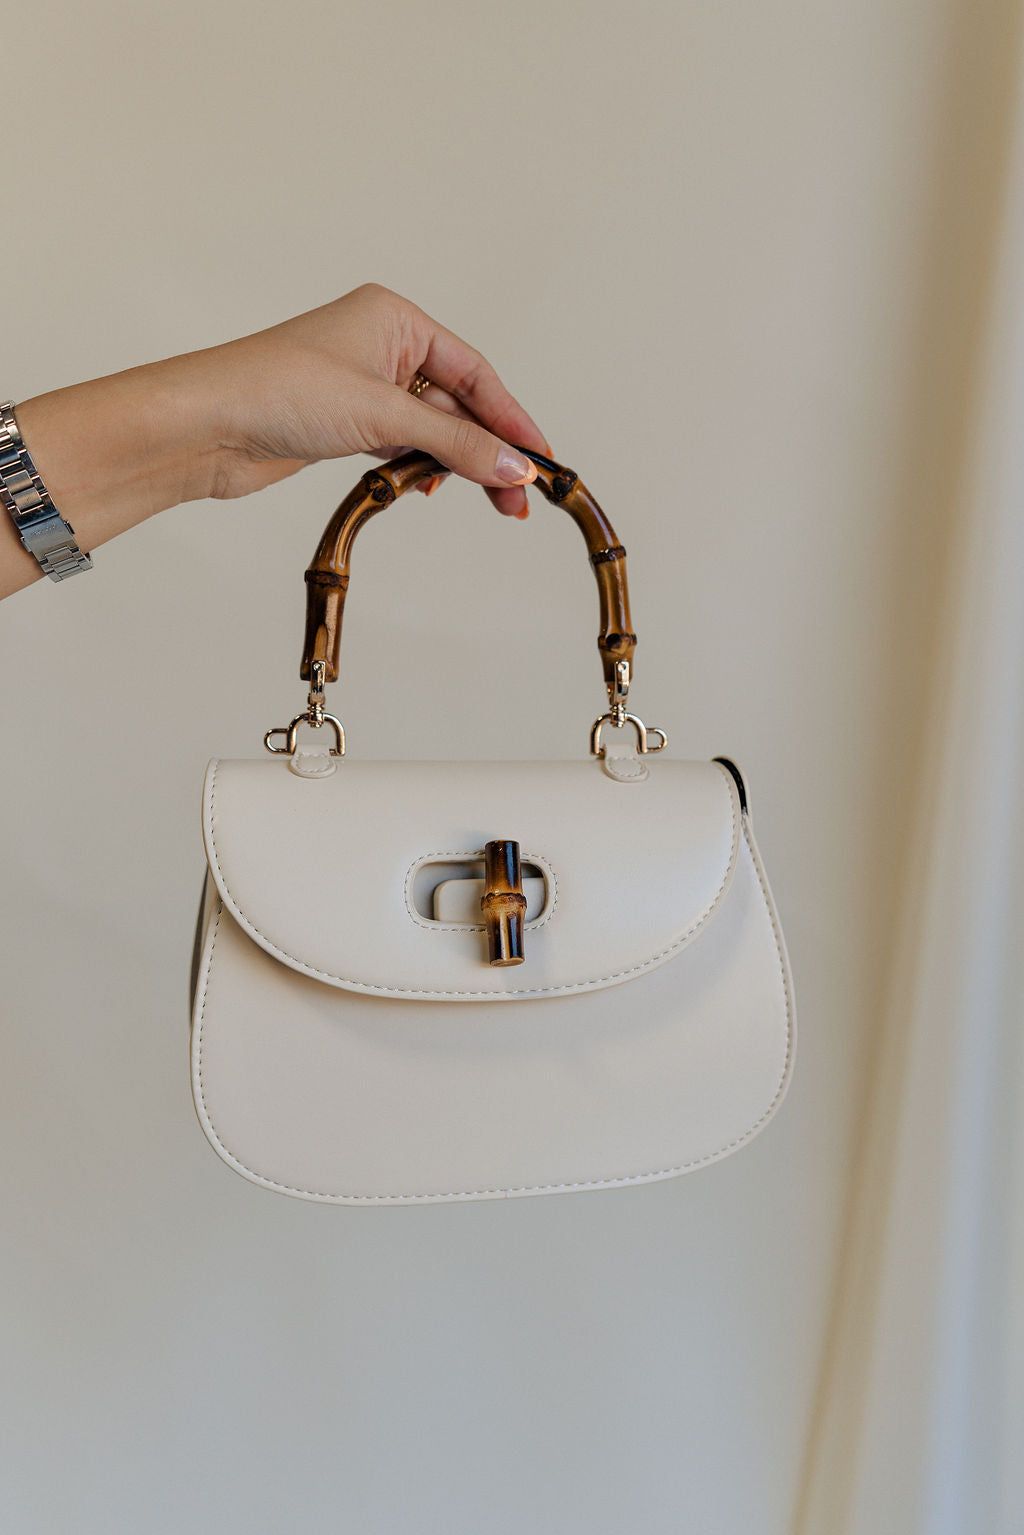 Model's hand is holding the Allison Ivory Wooden Bamboo Strap Purse which features ivory leather, wooden bamboo strap and knob closure, black lining and gold hardware details